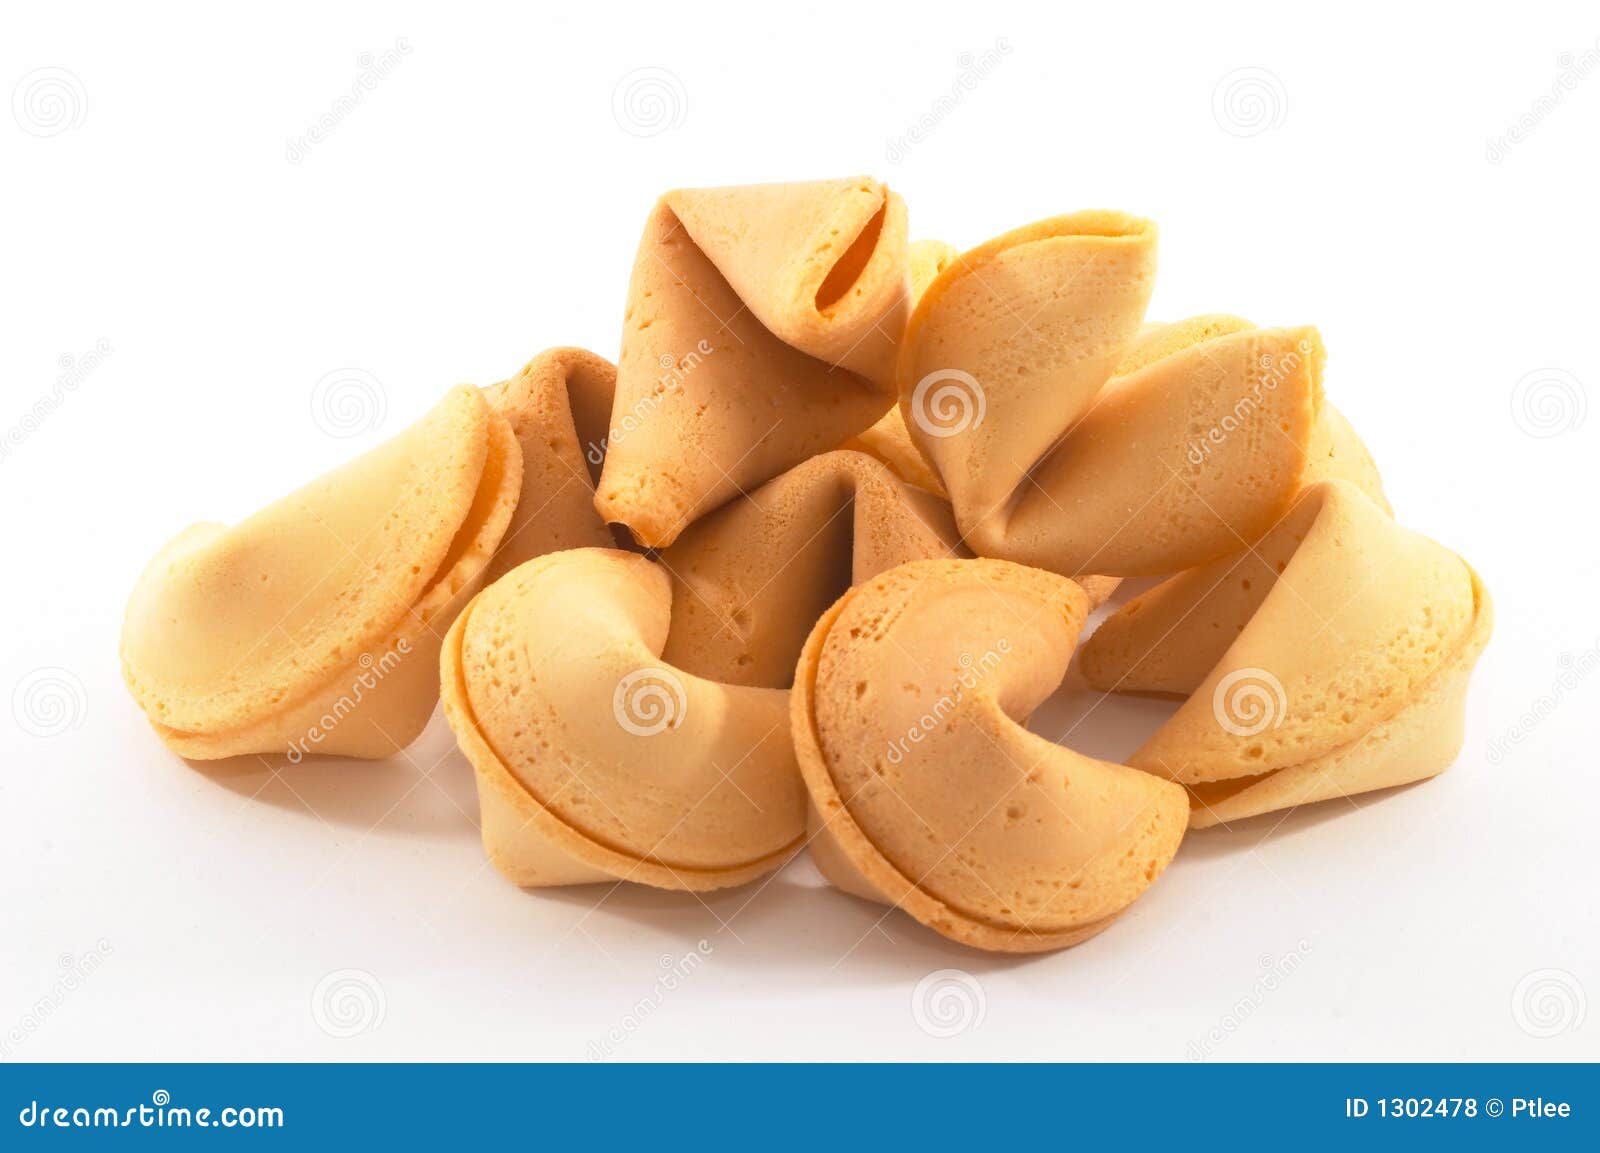 many chinese fortune cookies